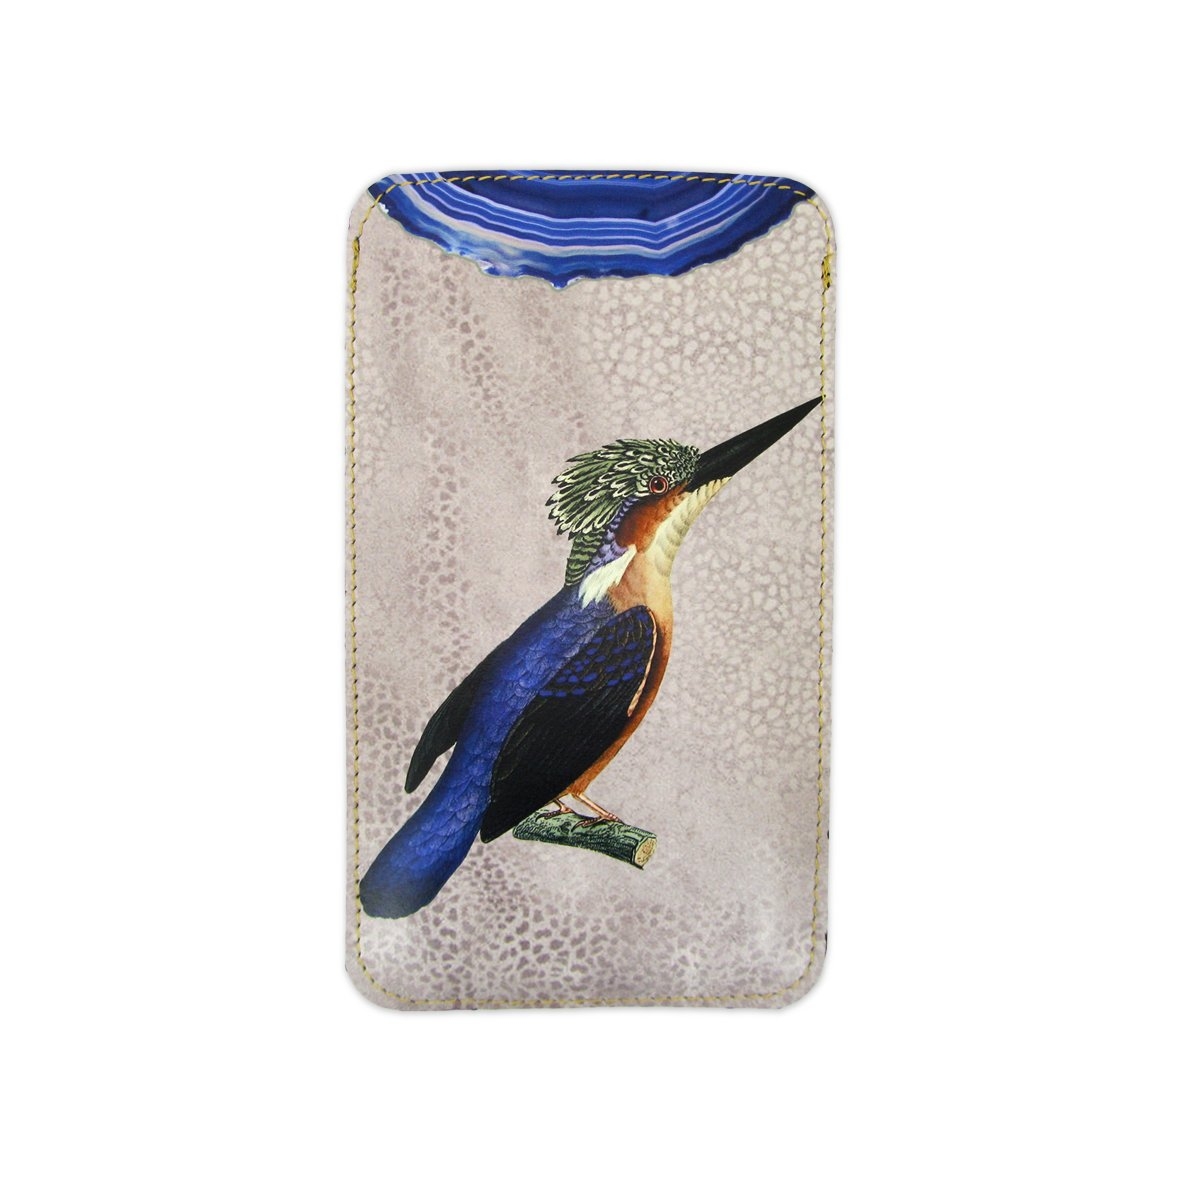 Leather Phone Case Sleeve – Kingfisher – iPhone 11 Pro Max / No personalisation / Blue